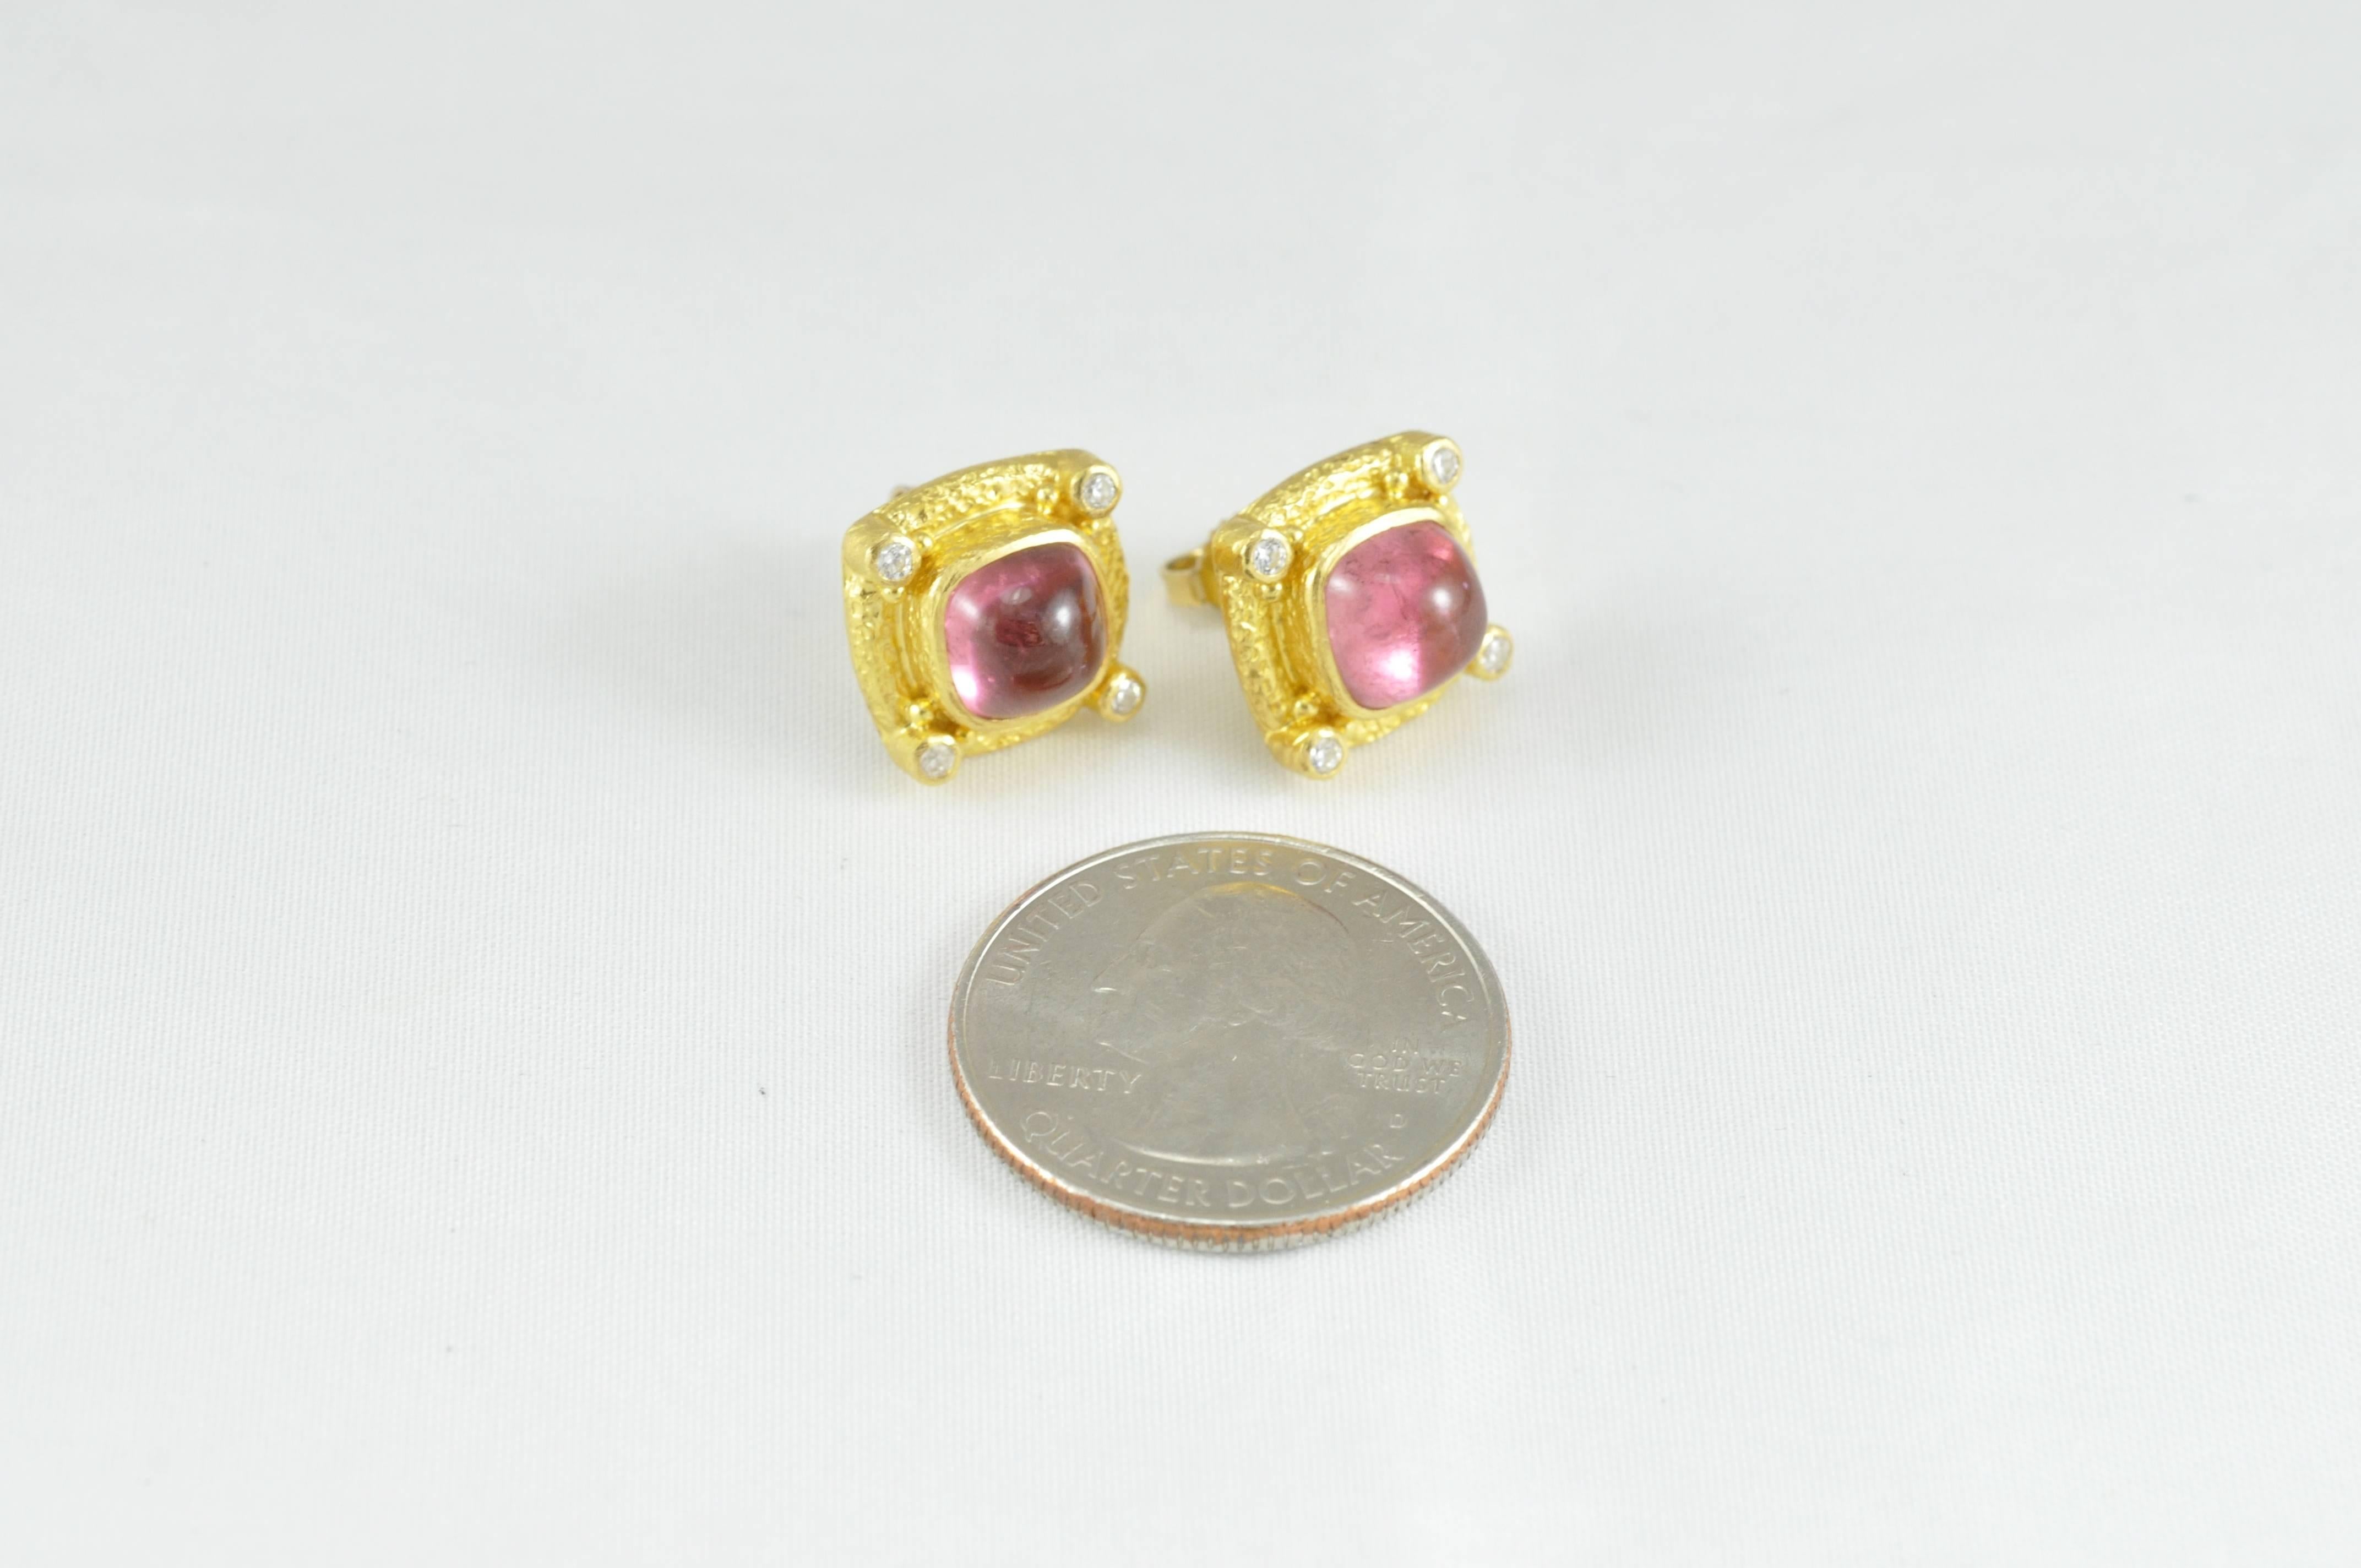 22K Yellow Gold,  Pink Tourmaline,  and White Diamond Earrings.  

These beautiful earrings made by Kimarie, appear a little pinker than the original photo shows.  

Made by craftsmen in Indonesia who's skill has been handed down from generation to